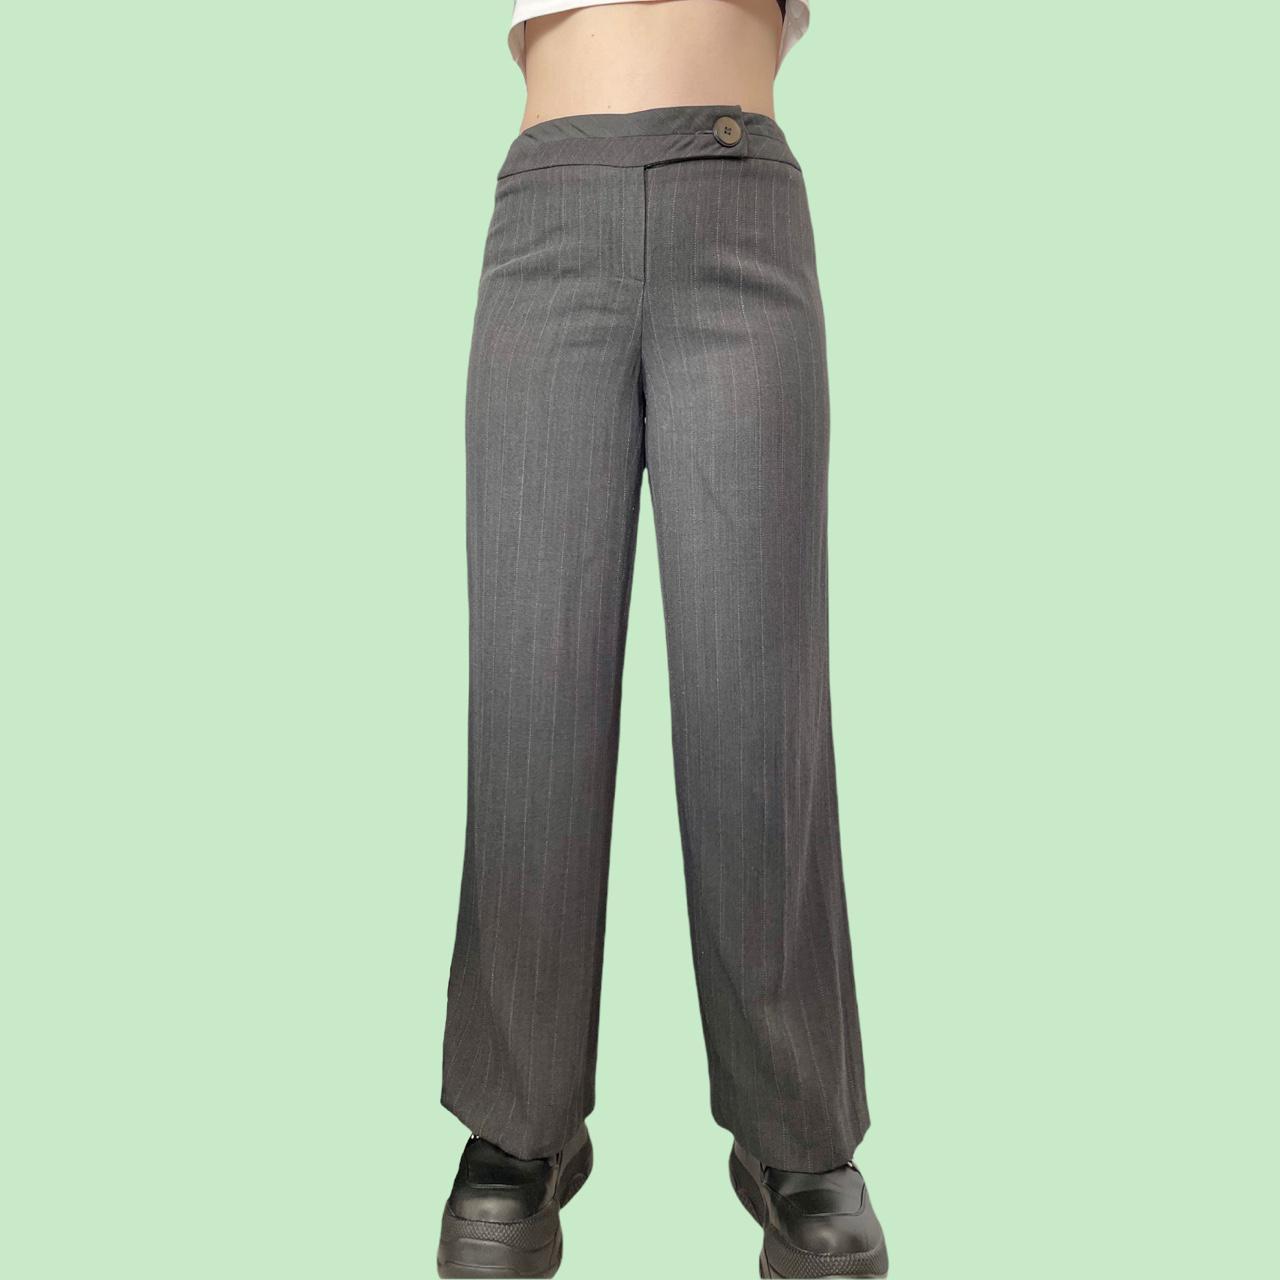 Product Image 1 - Petite pinstripe trousers

In excellent condition.

Material